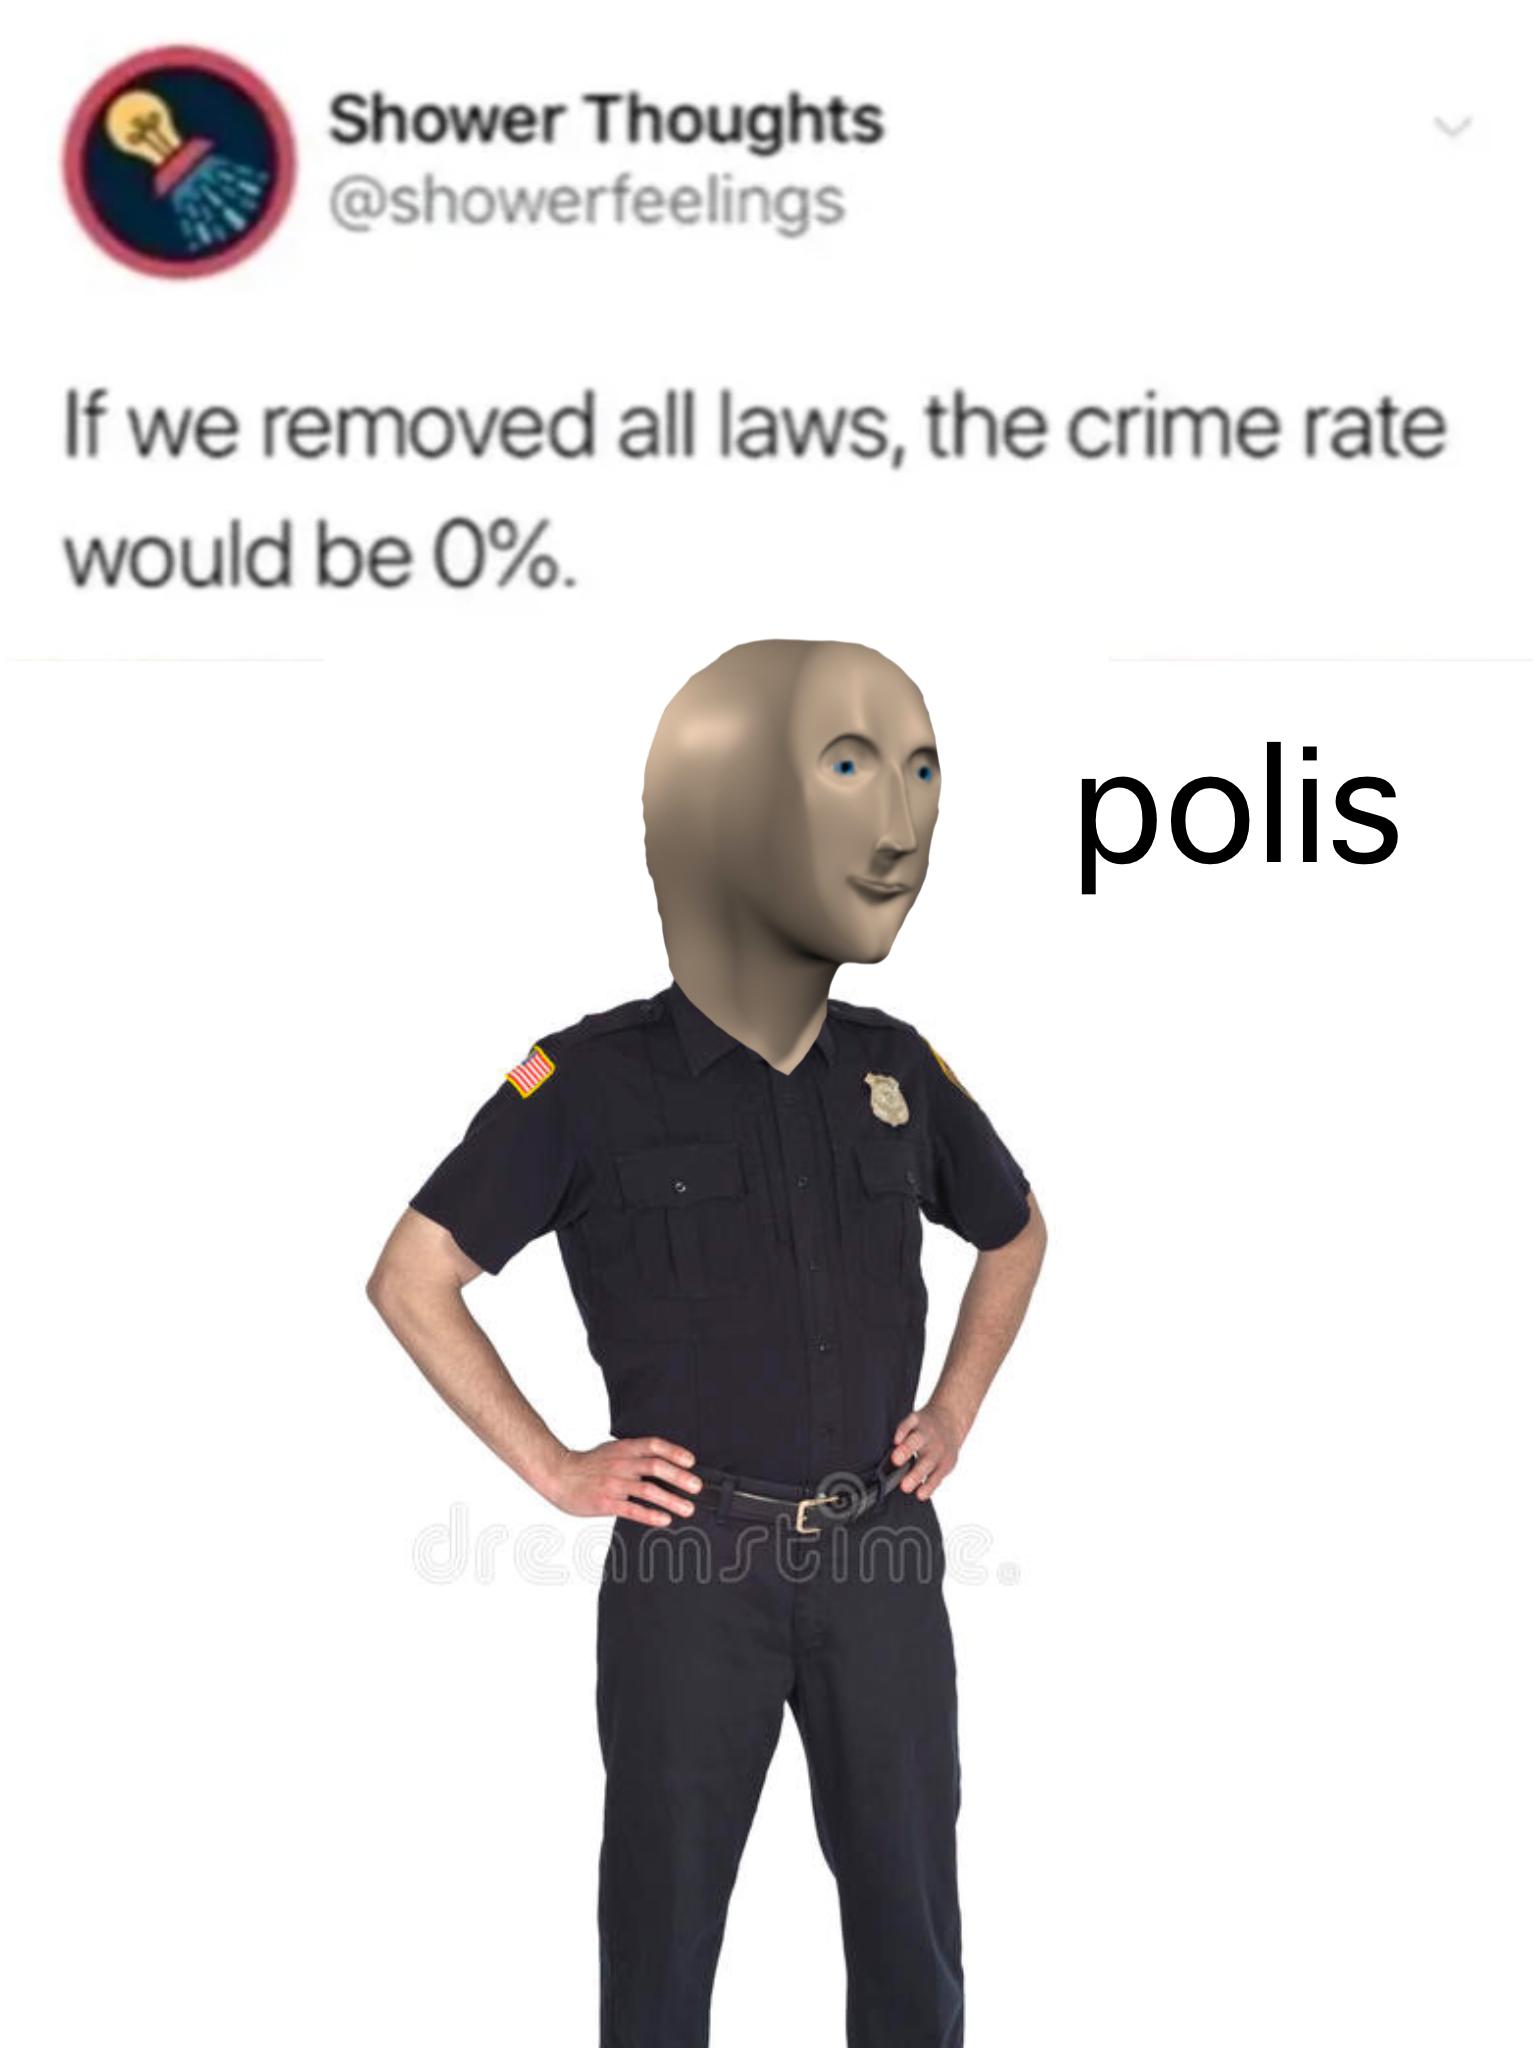 r showerthoughts - Shower Thoughts If we removed all laws, the crime rate would be 0% polis